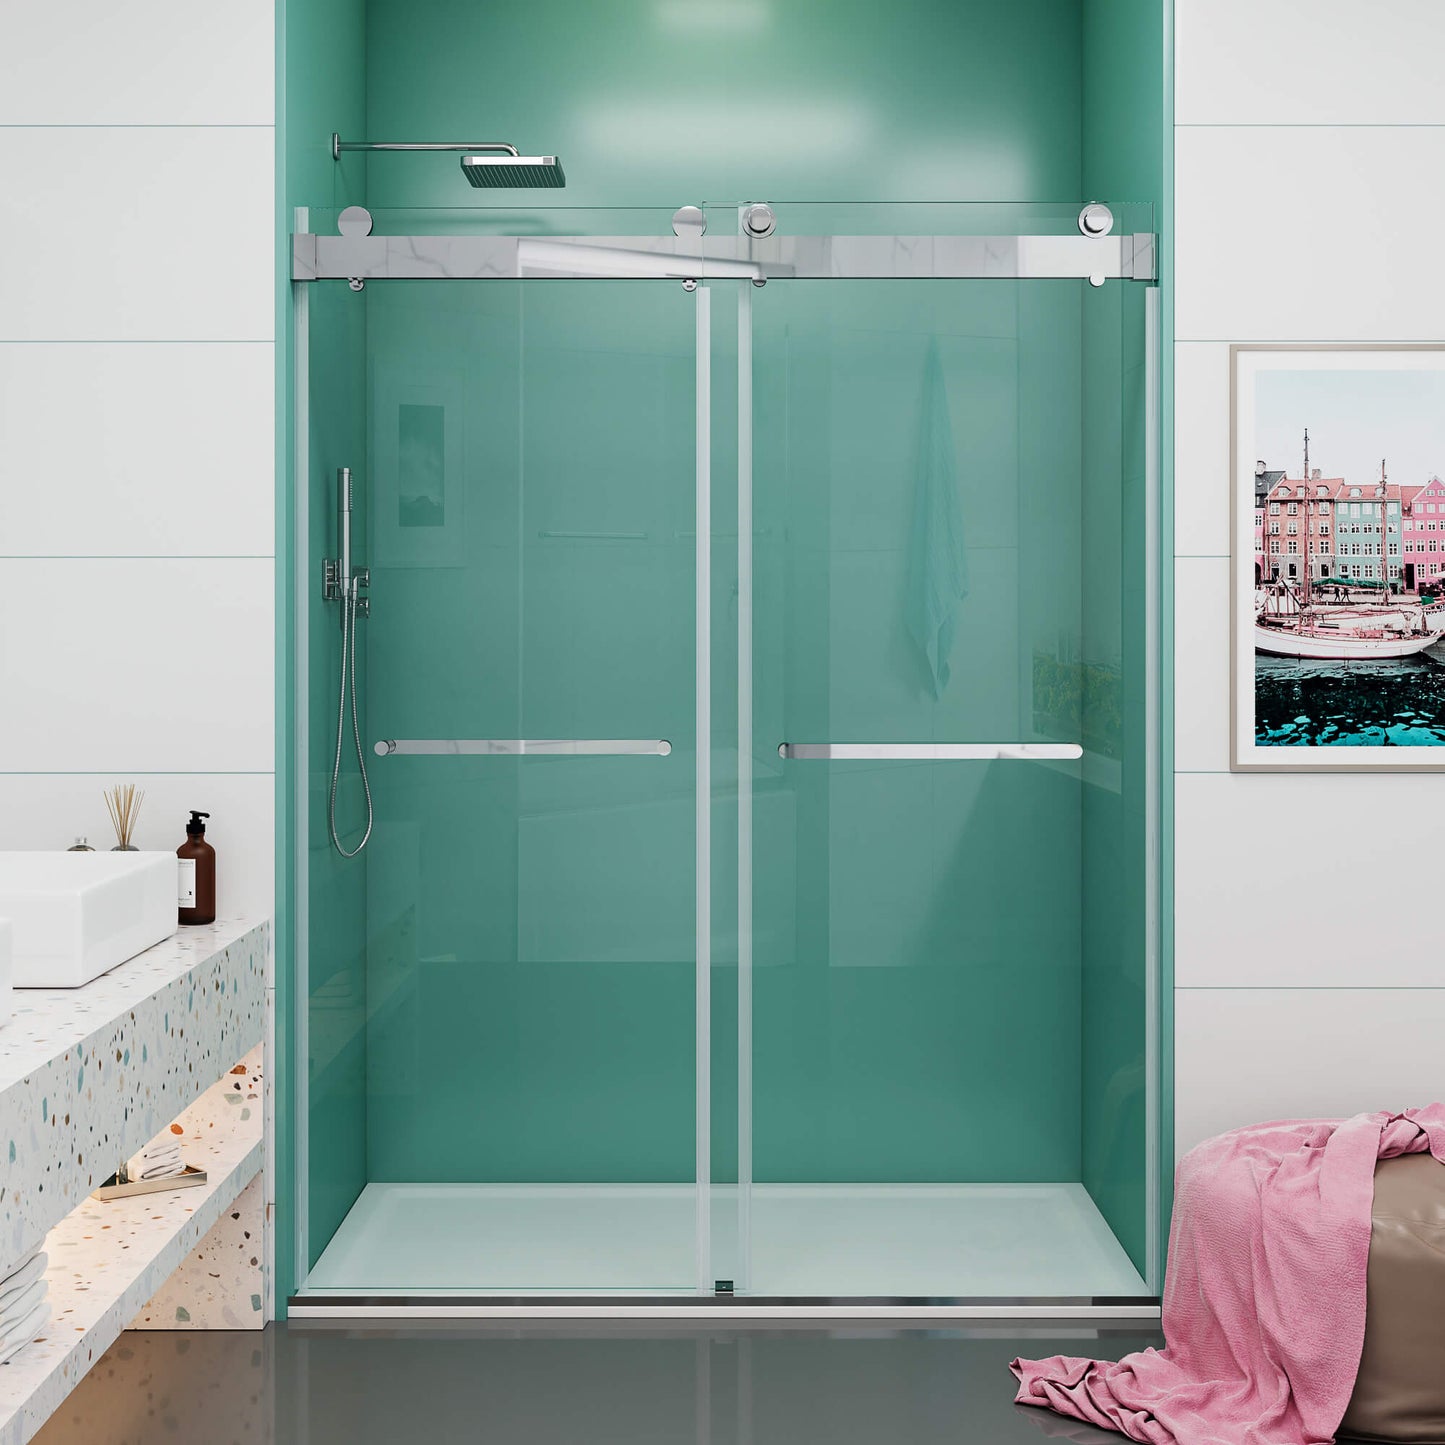 MCOCOD DS13 Soft-Closing Double Sliding Shower Door in Chrome